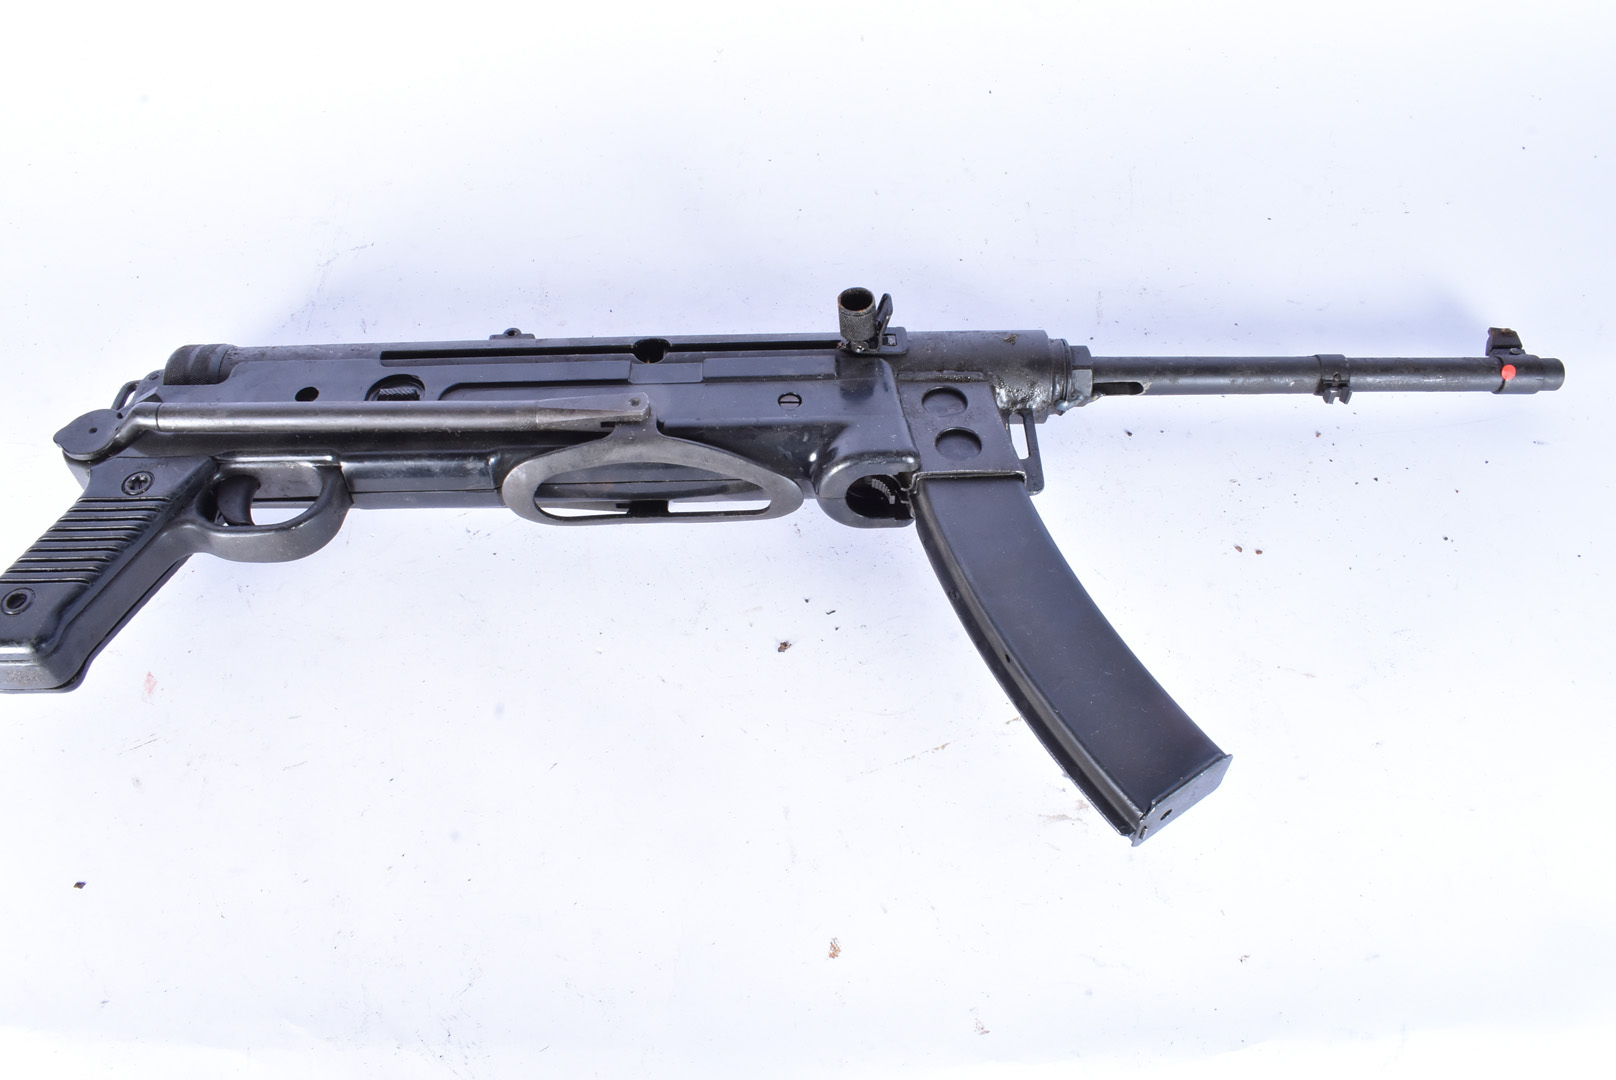 A Deactivated Yugoslavian M56 7.62mm sub machine gun, the M56 saw service between 1956 and 1992,